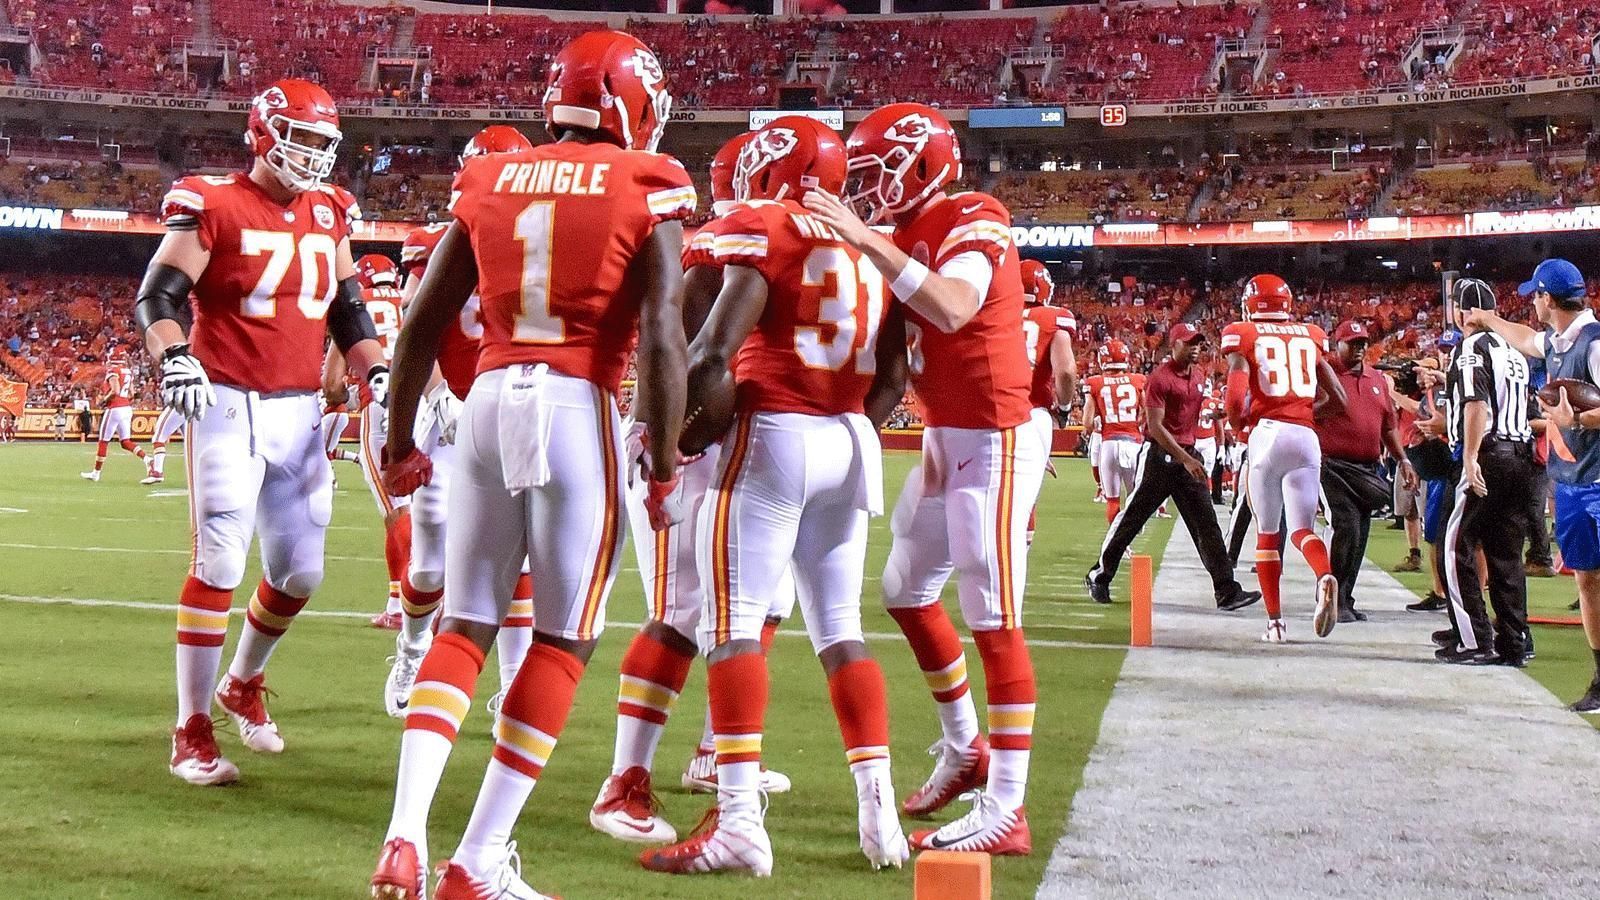 
                <strong>Kansas City Chiefs</strong><br>
                2018: 25.8 (13)     2017: 25.9 (14)     2016: 25.5 (6)     2015: 25.8 (6)     2014: 25.3 (3)     2013: 25.7 (8)
              